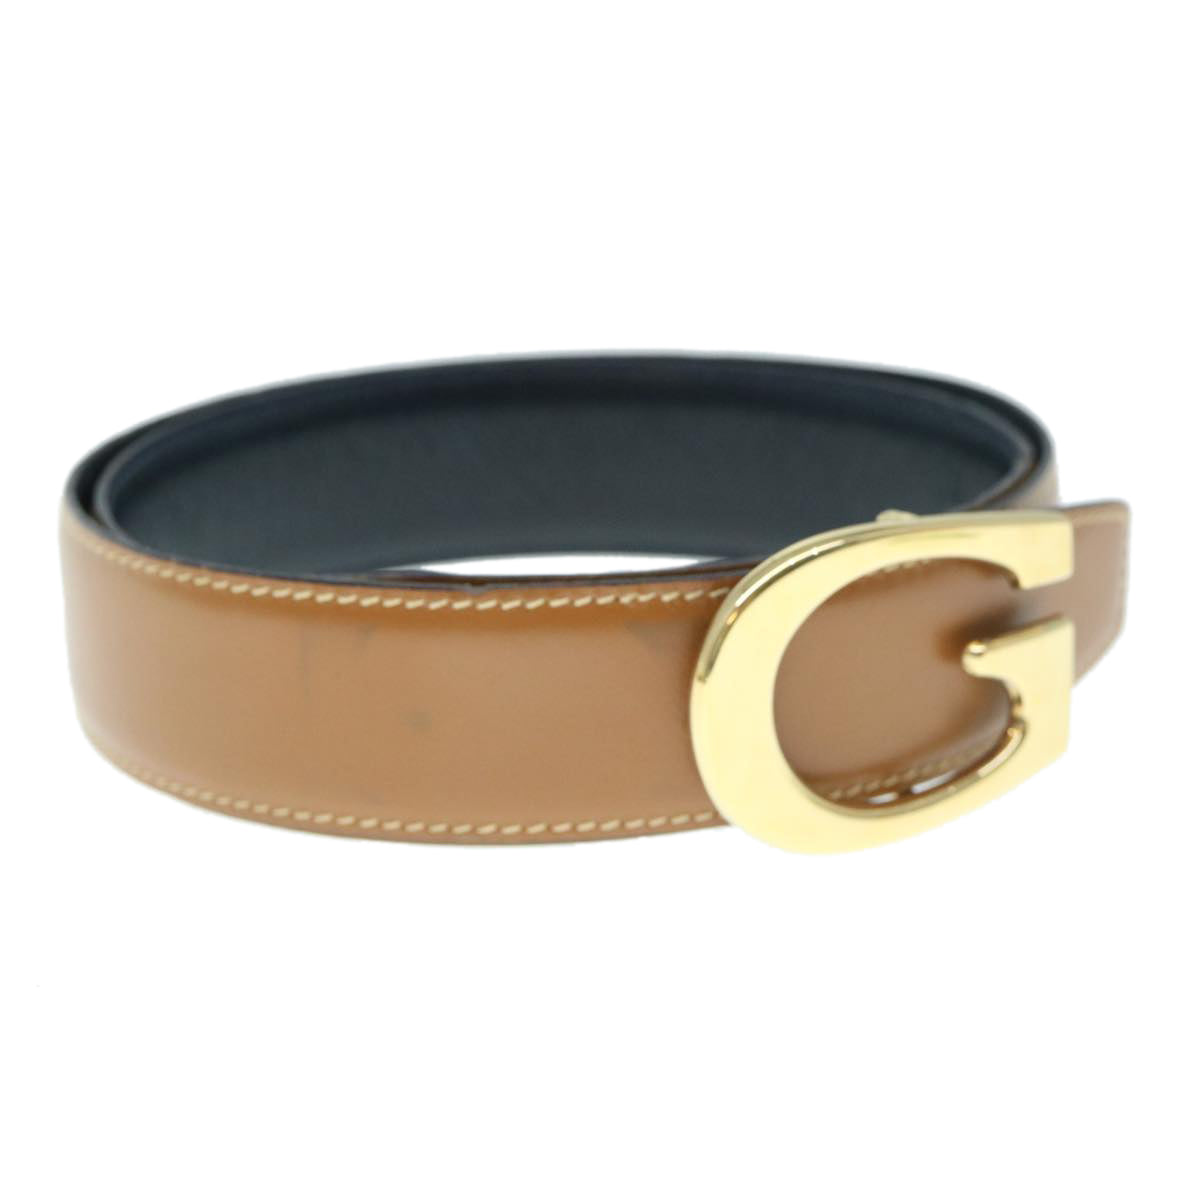 GUCCI Belt Leather 29.1""-31.1"" Brown Auth ar10893 - 0